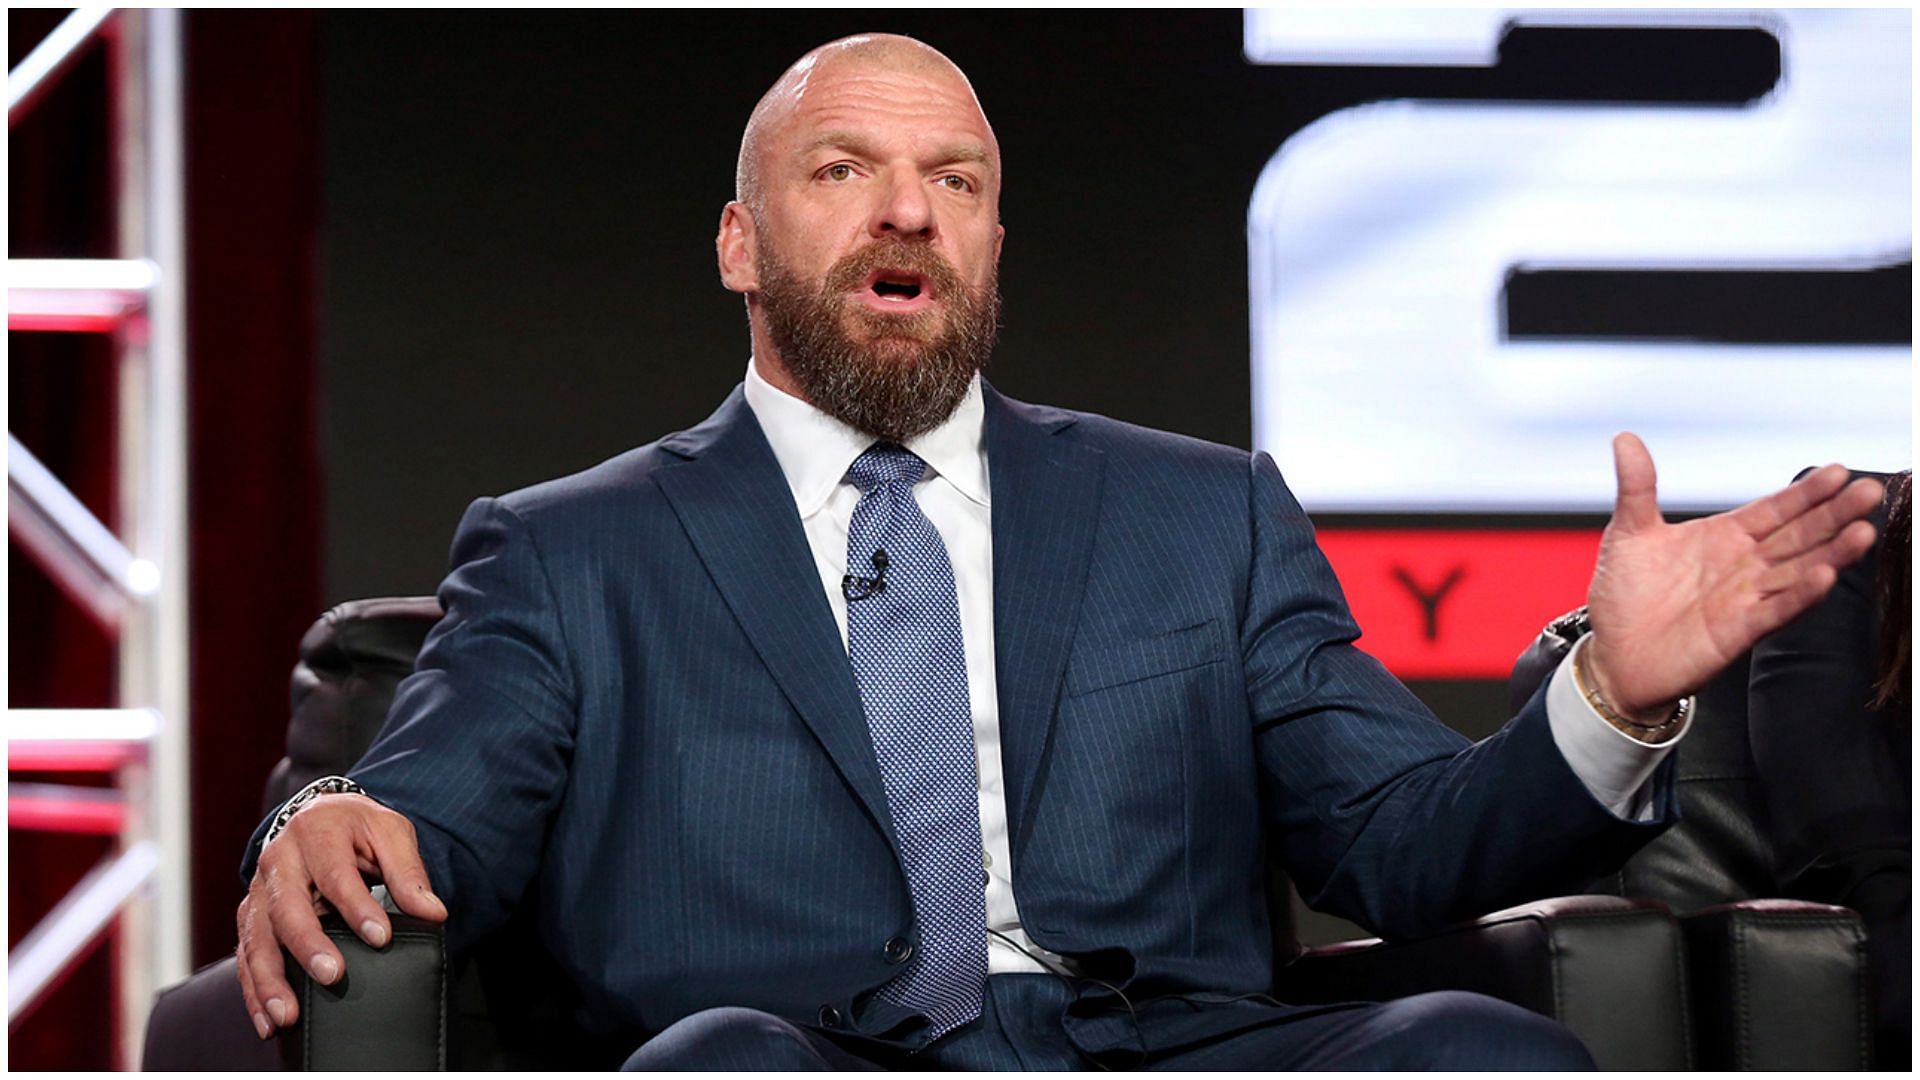 Triple H and WWE has potentially huge plans for this star.